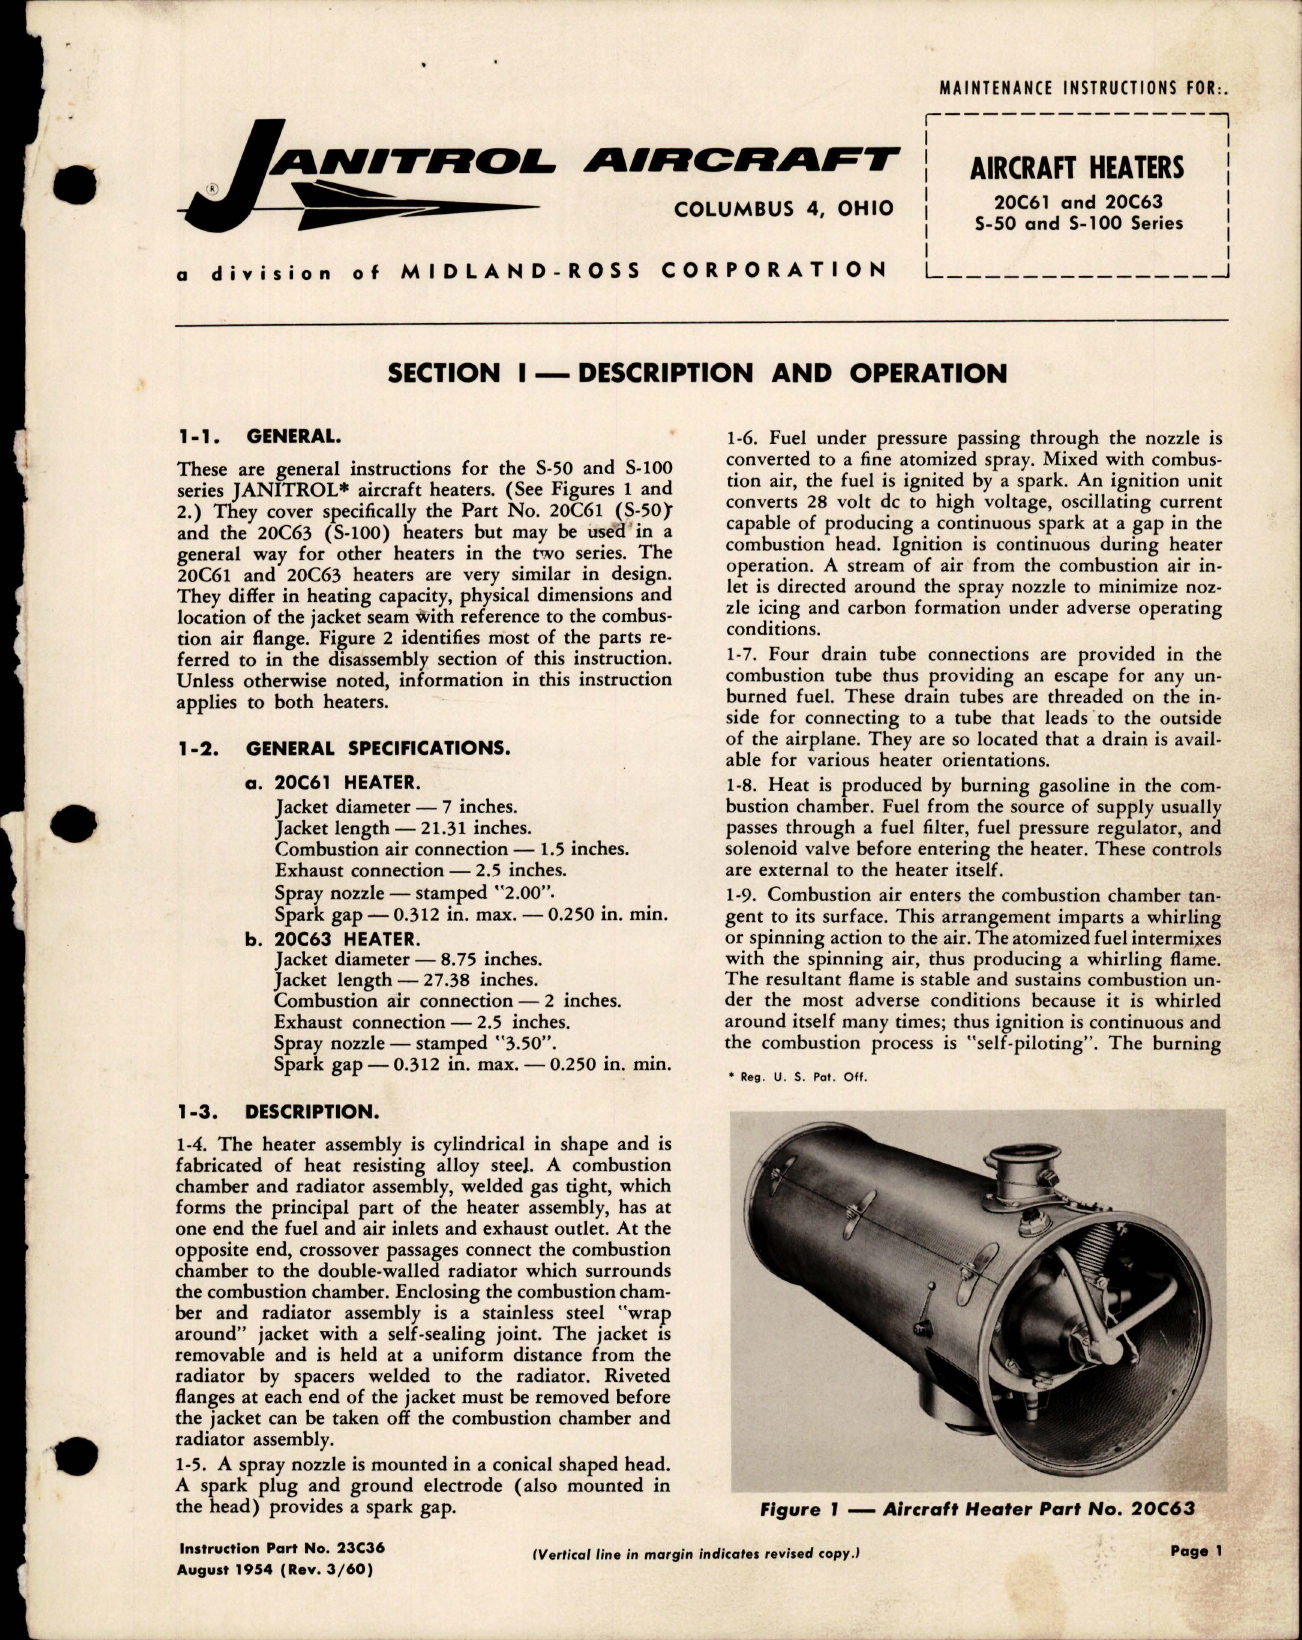 Sample page 1 from AirCorps Library document: Maintenance Instructions for Aircraft Heaters - 20C61 and 20C63, S-50 and S-100 Series 